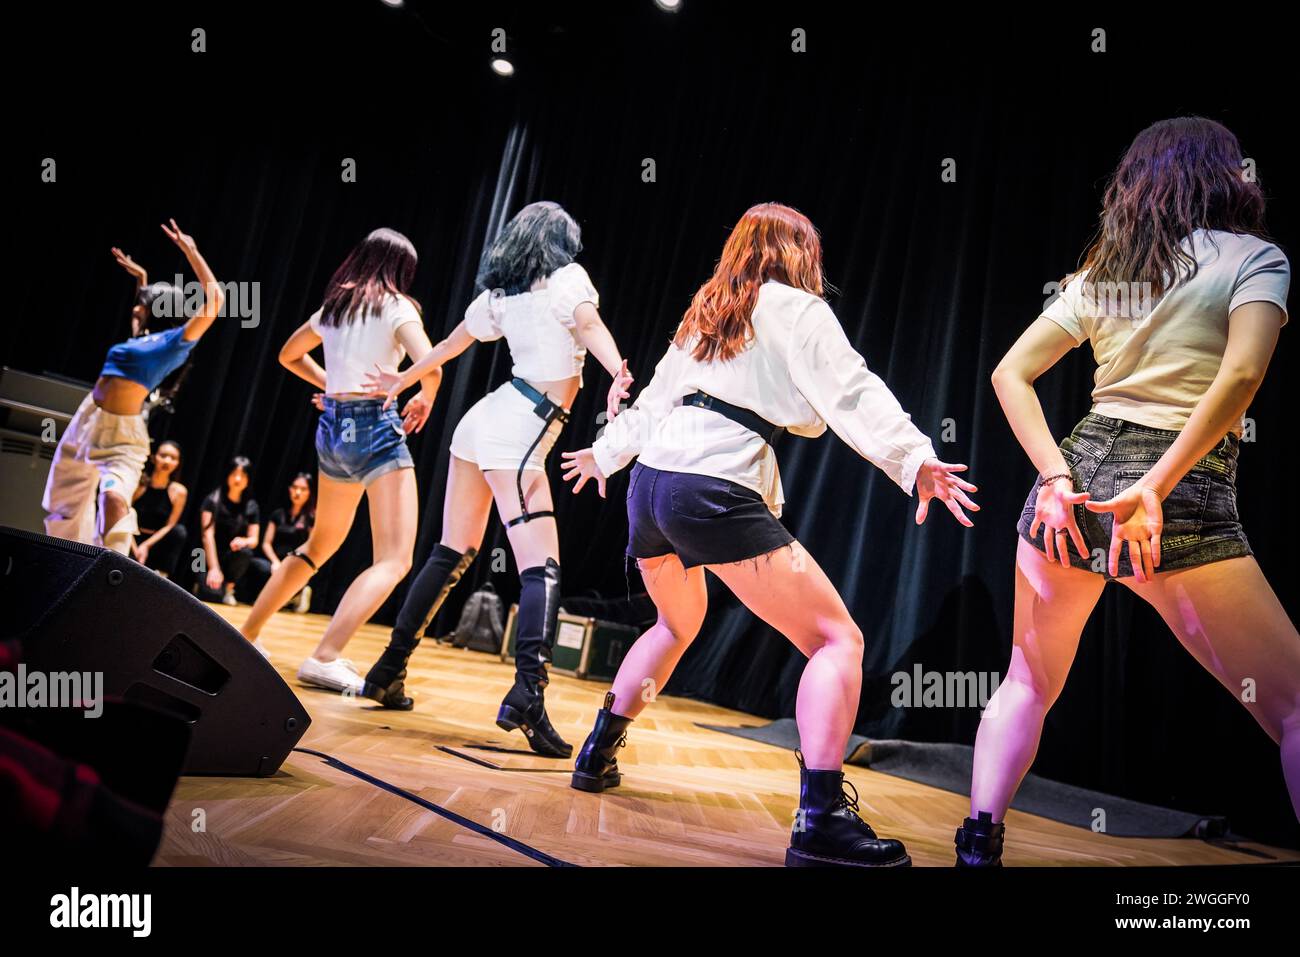 Group of diverse women in stylish outfits and black boots performing on stage Stock Photo